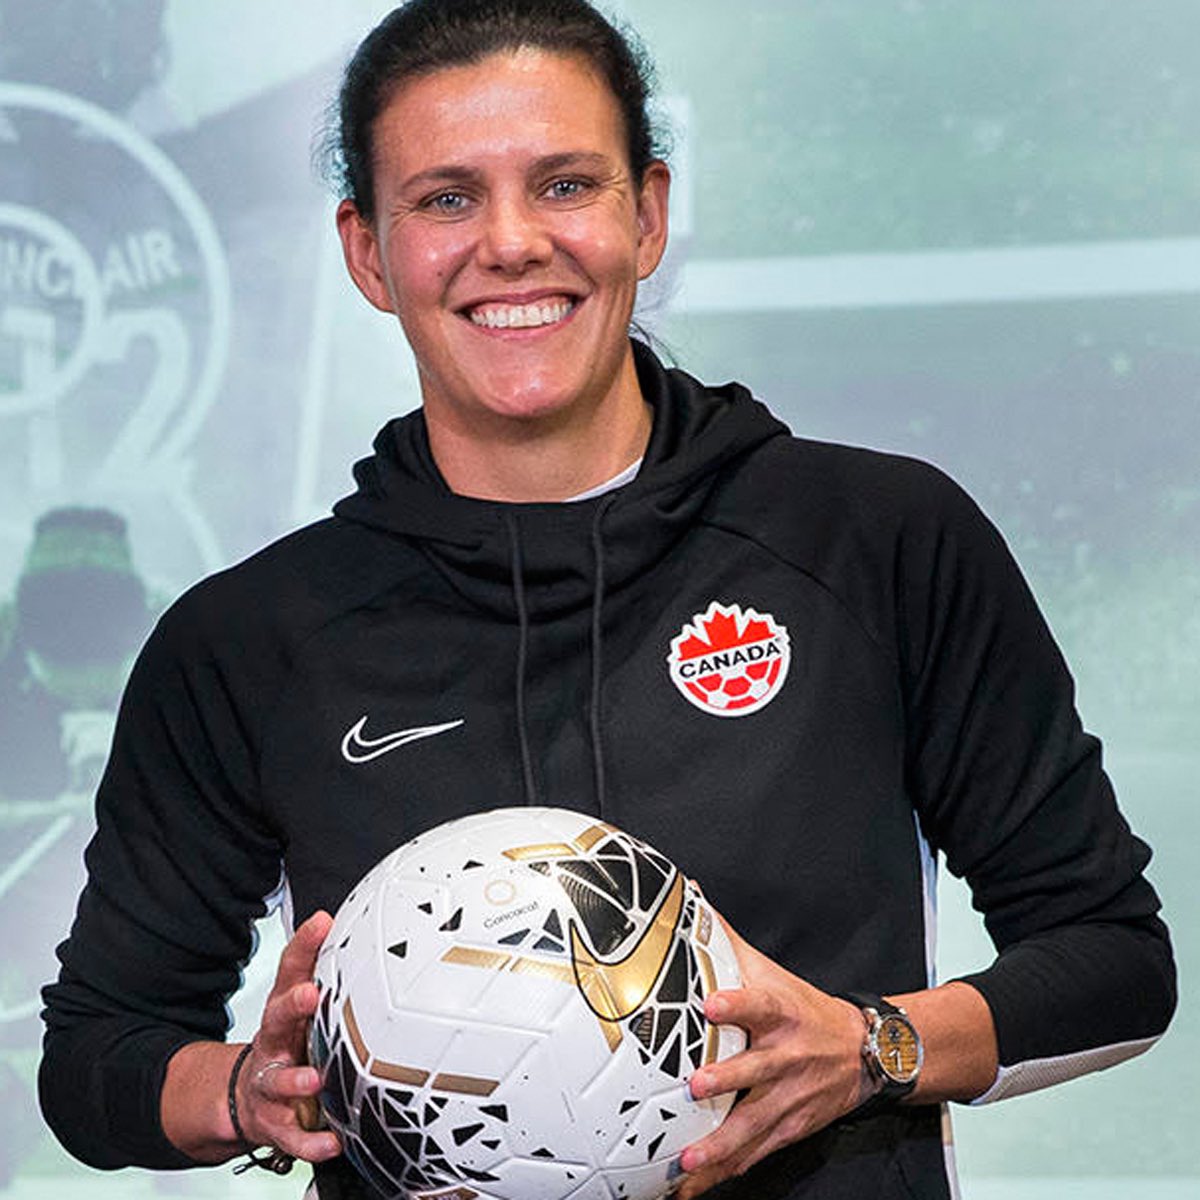 Congratulations and happy retirement to an extraordinary athlete and woman, a Canadian hero, Christine Sinclair!